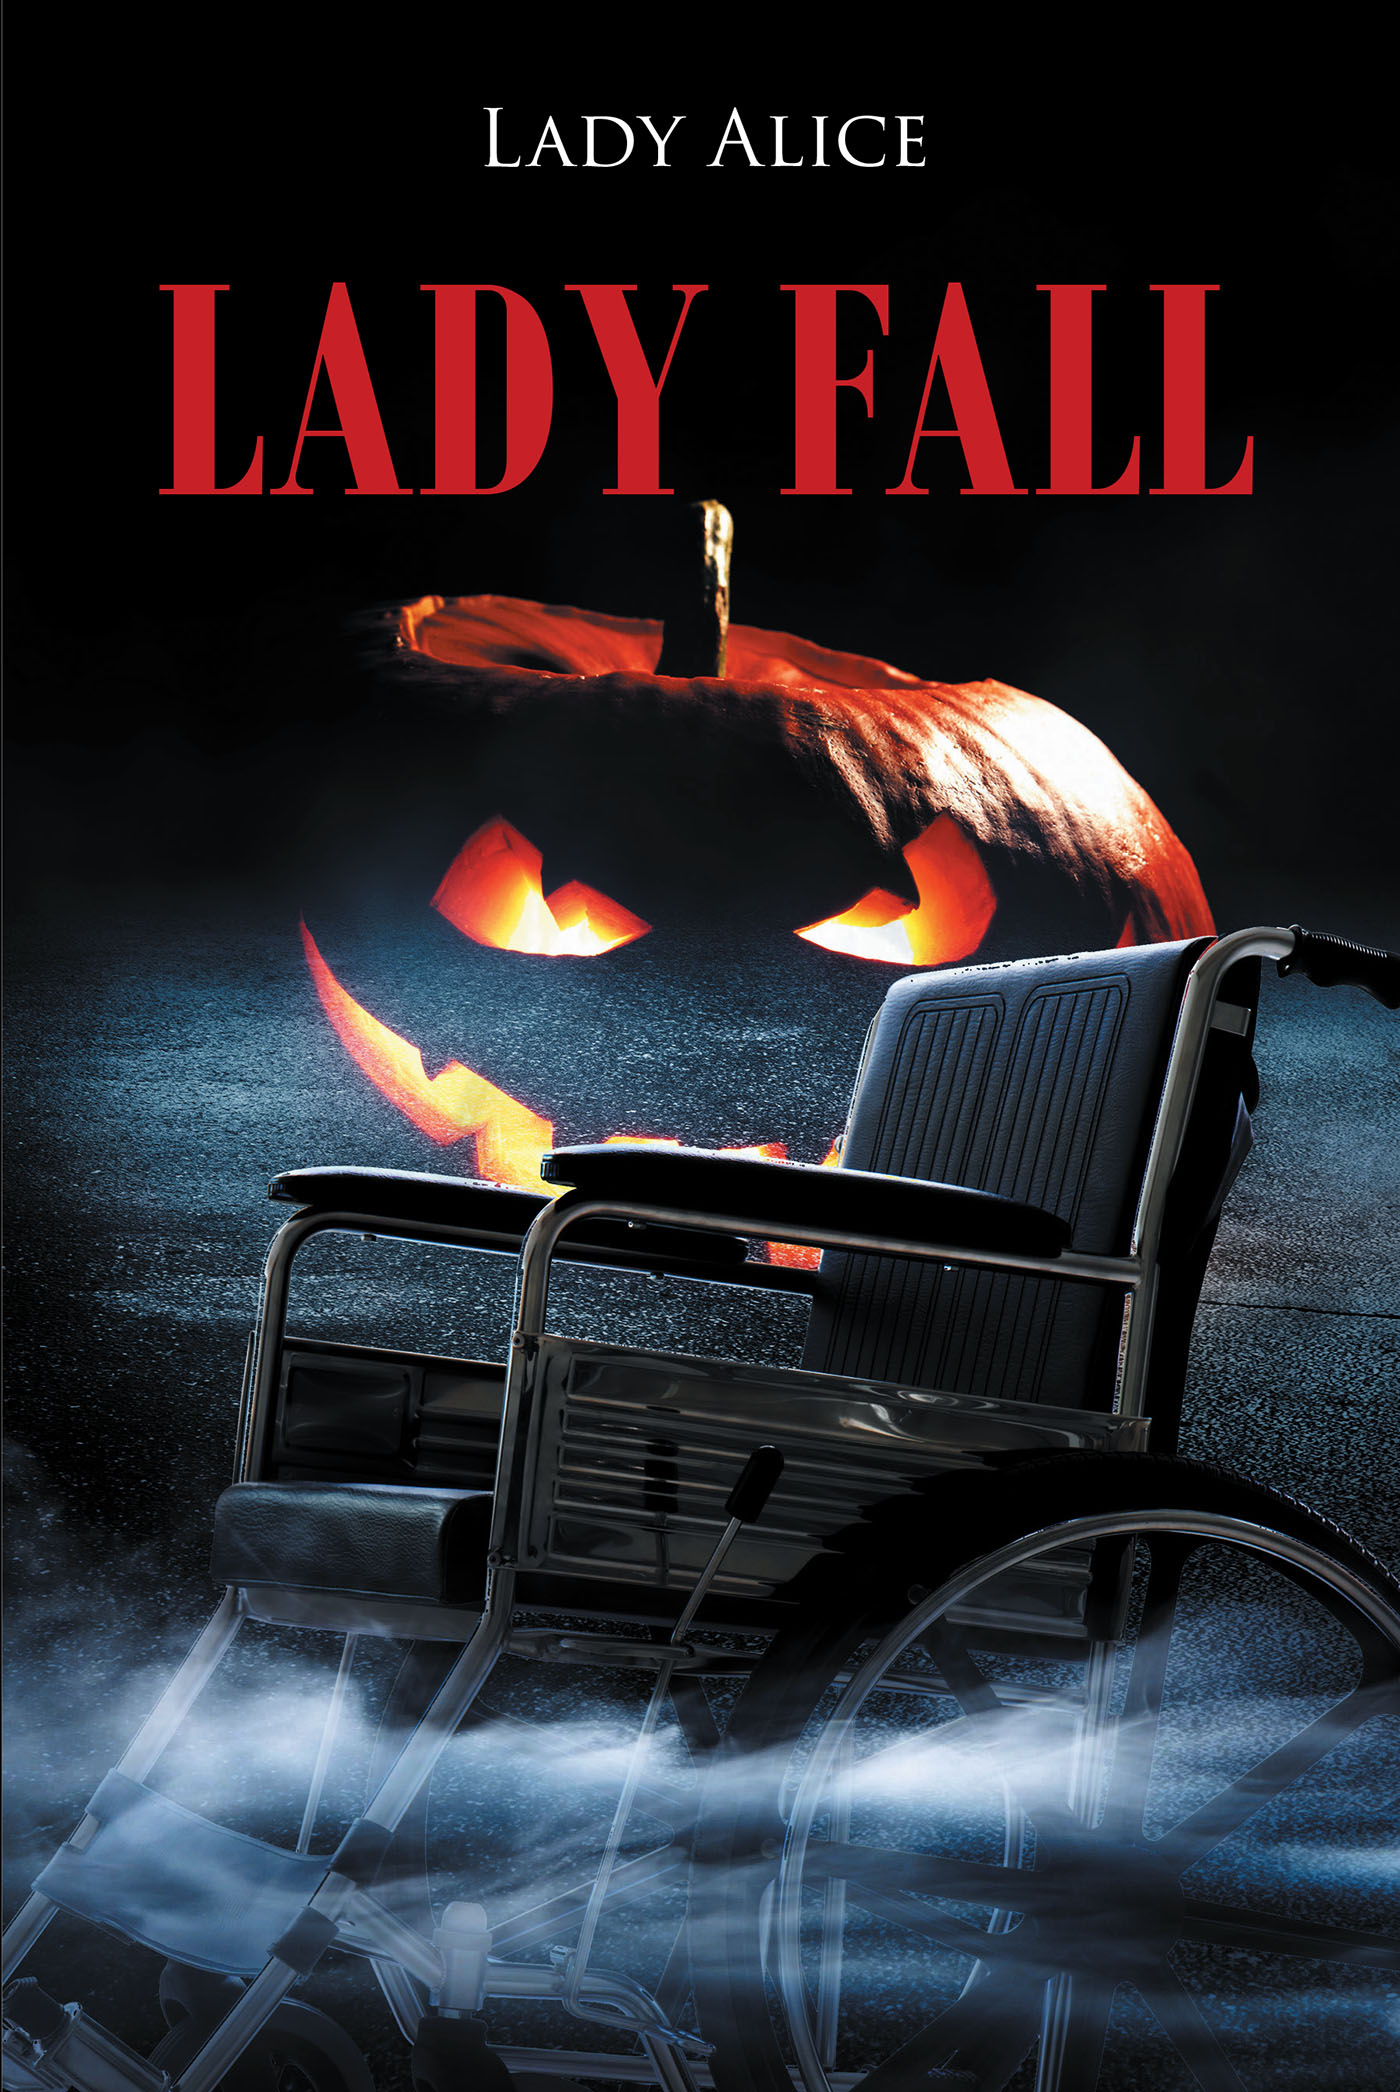 Author Lady Alice’s New Book, "Lady Fall," is a Poignant Story Encouraging Readers That Everyone's Voices Must be Heard in Order to Change the Corruption of the World